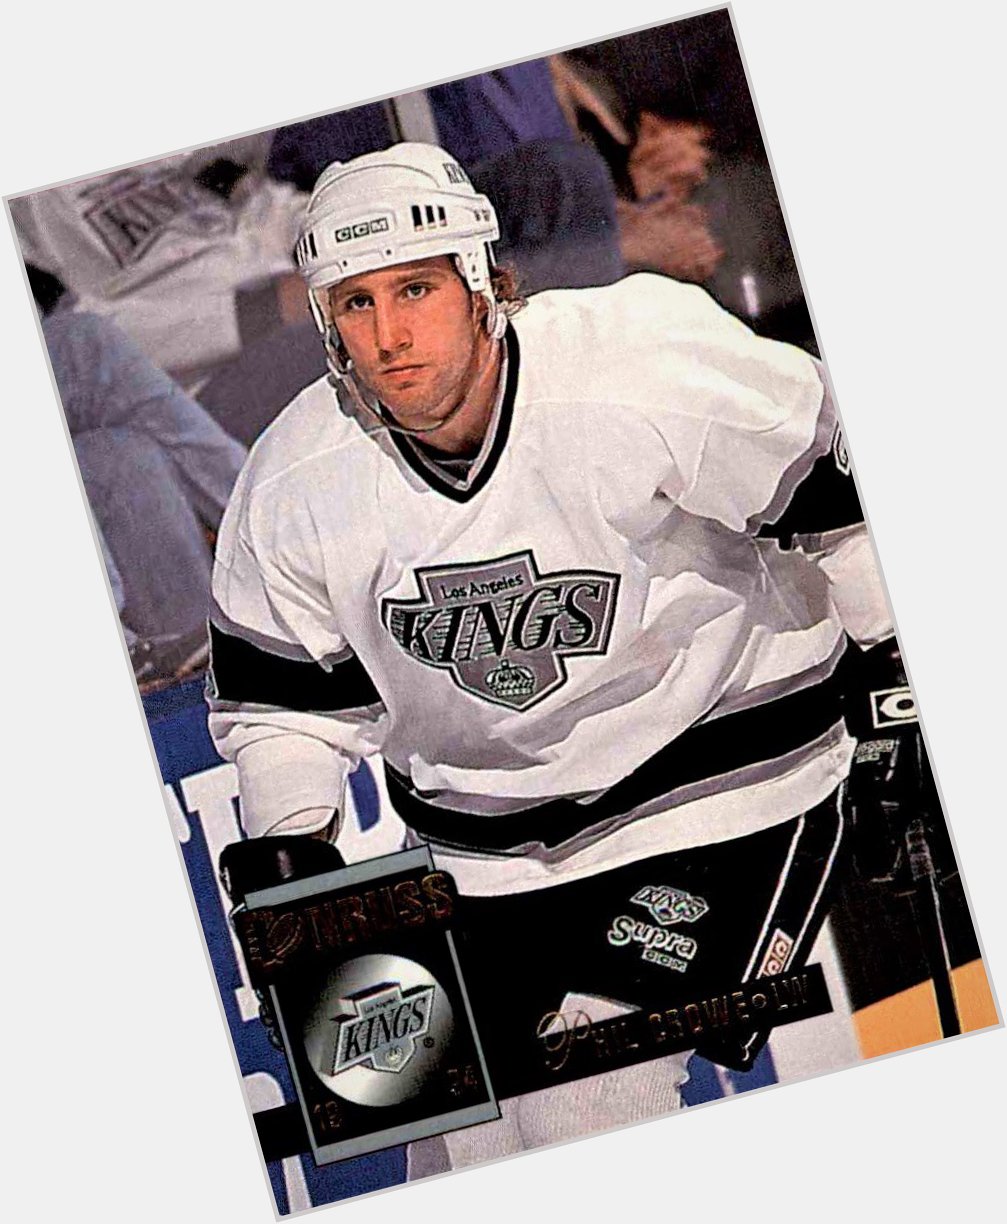 Happy birthday to former enforcer Phil Crowe, who was born on April 4, 1970.  